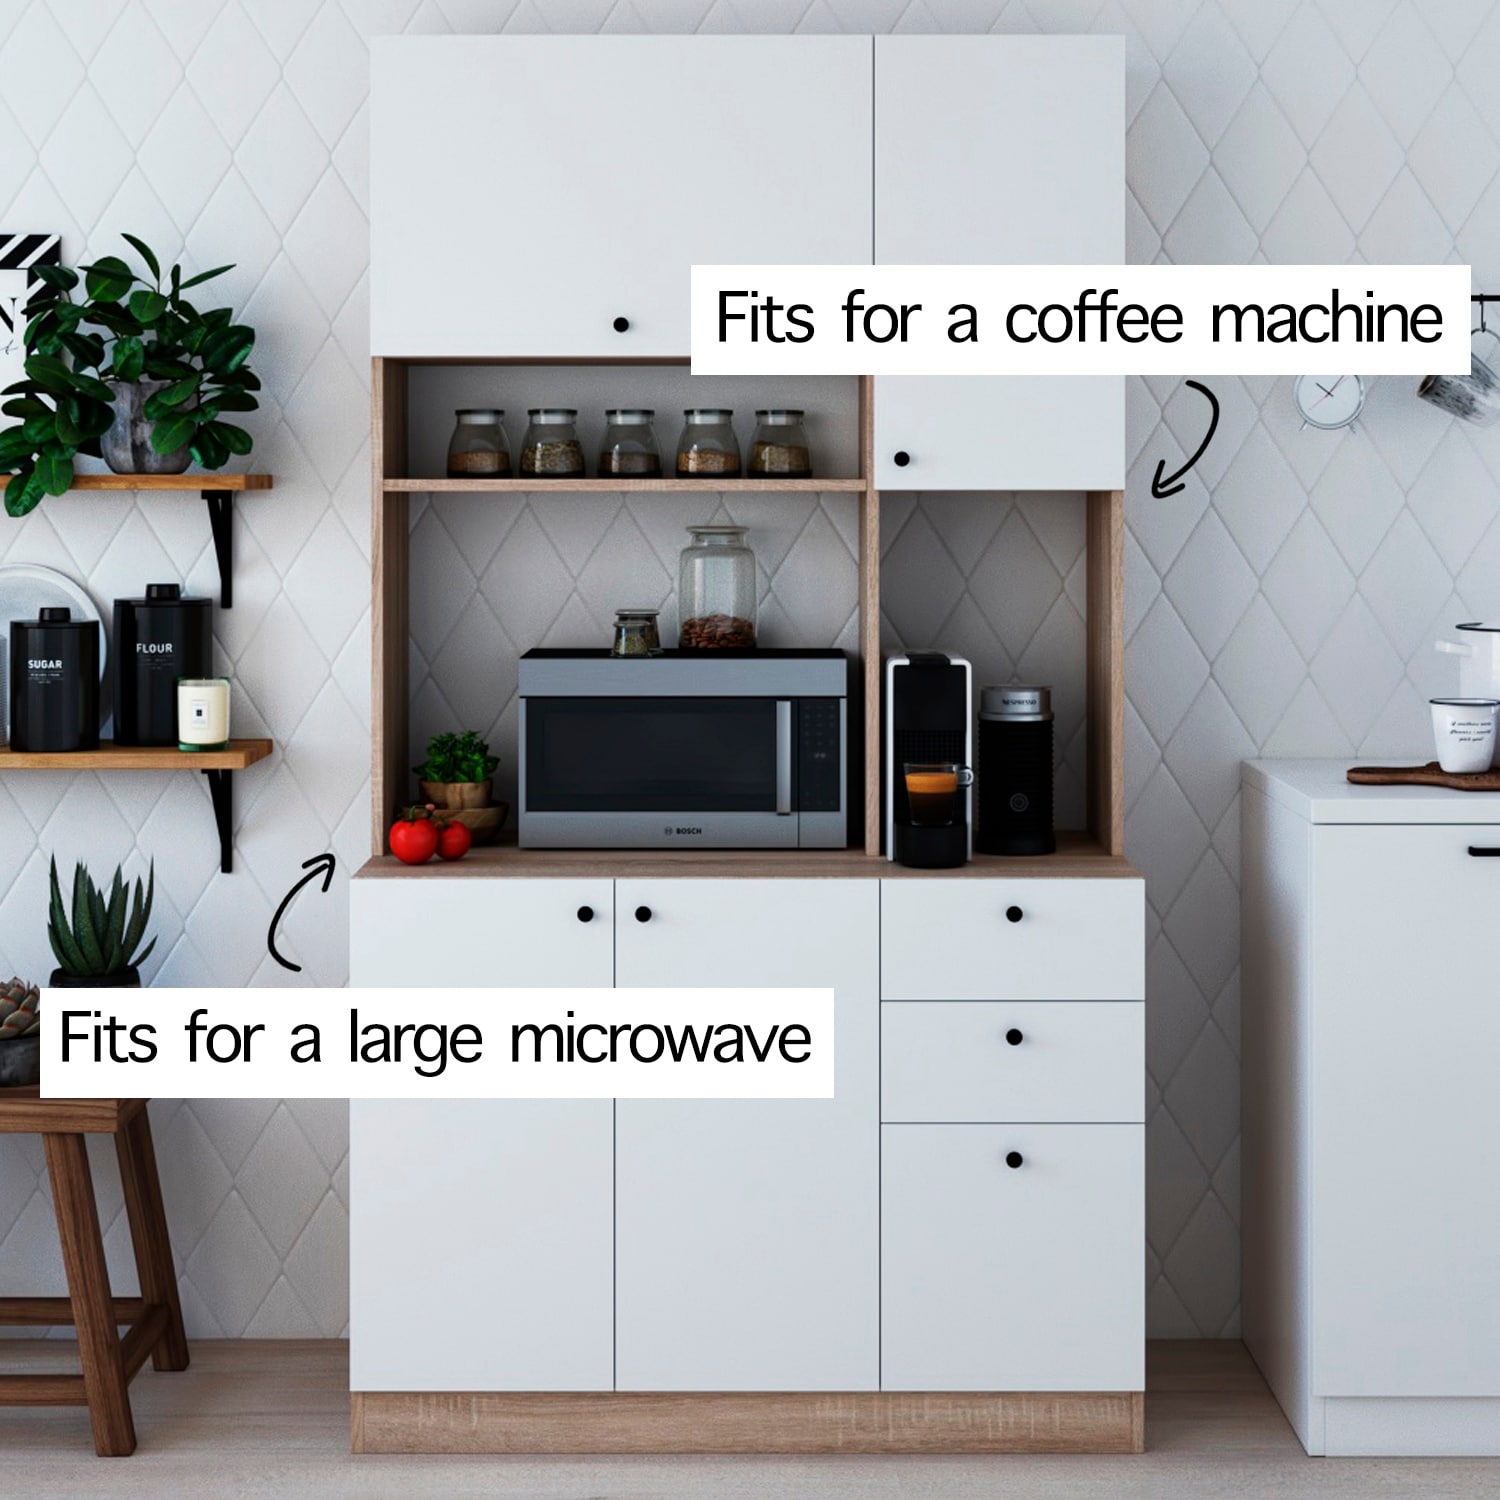 https://ak1.ostkcdn.com/images/products/is/images/direct/64bed89b2330e9dc5c0a3e70e03915a1ed202b15/Living-Skog-Scandi-Pantry-Kitchen-Storage-Cabinet-White-Large-For-Microwave.jpg